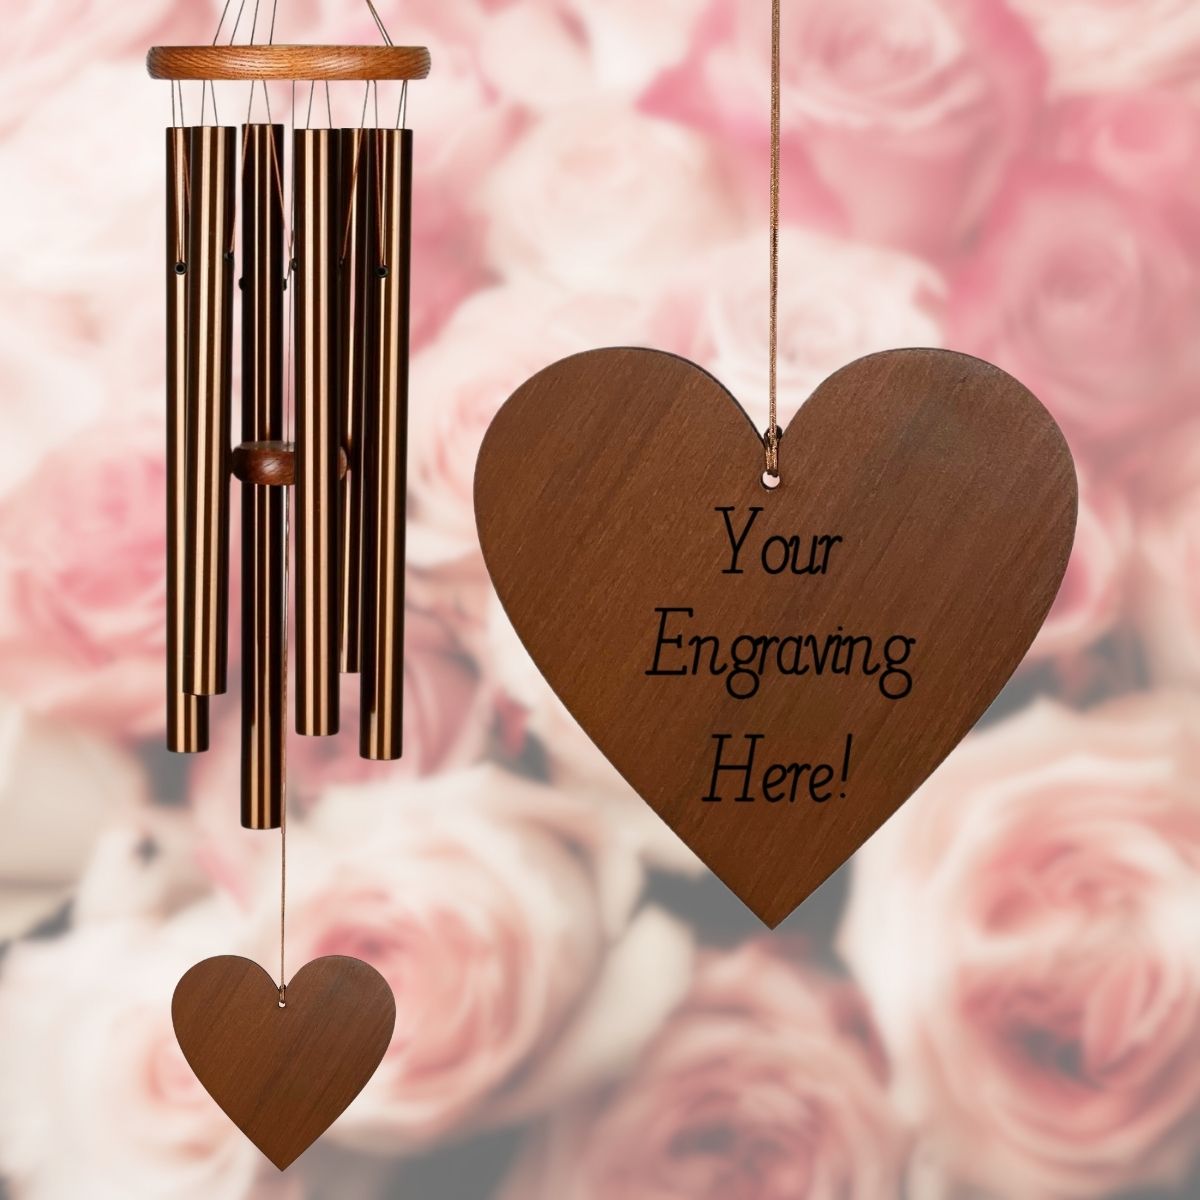 Amazing Grace 25 Inch Wind Chime - Engraveable Heart Sail - Bronze